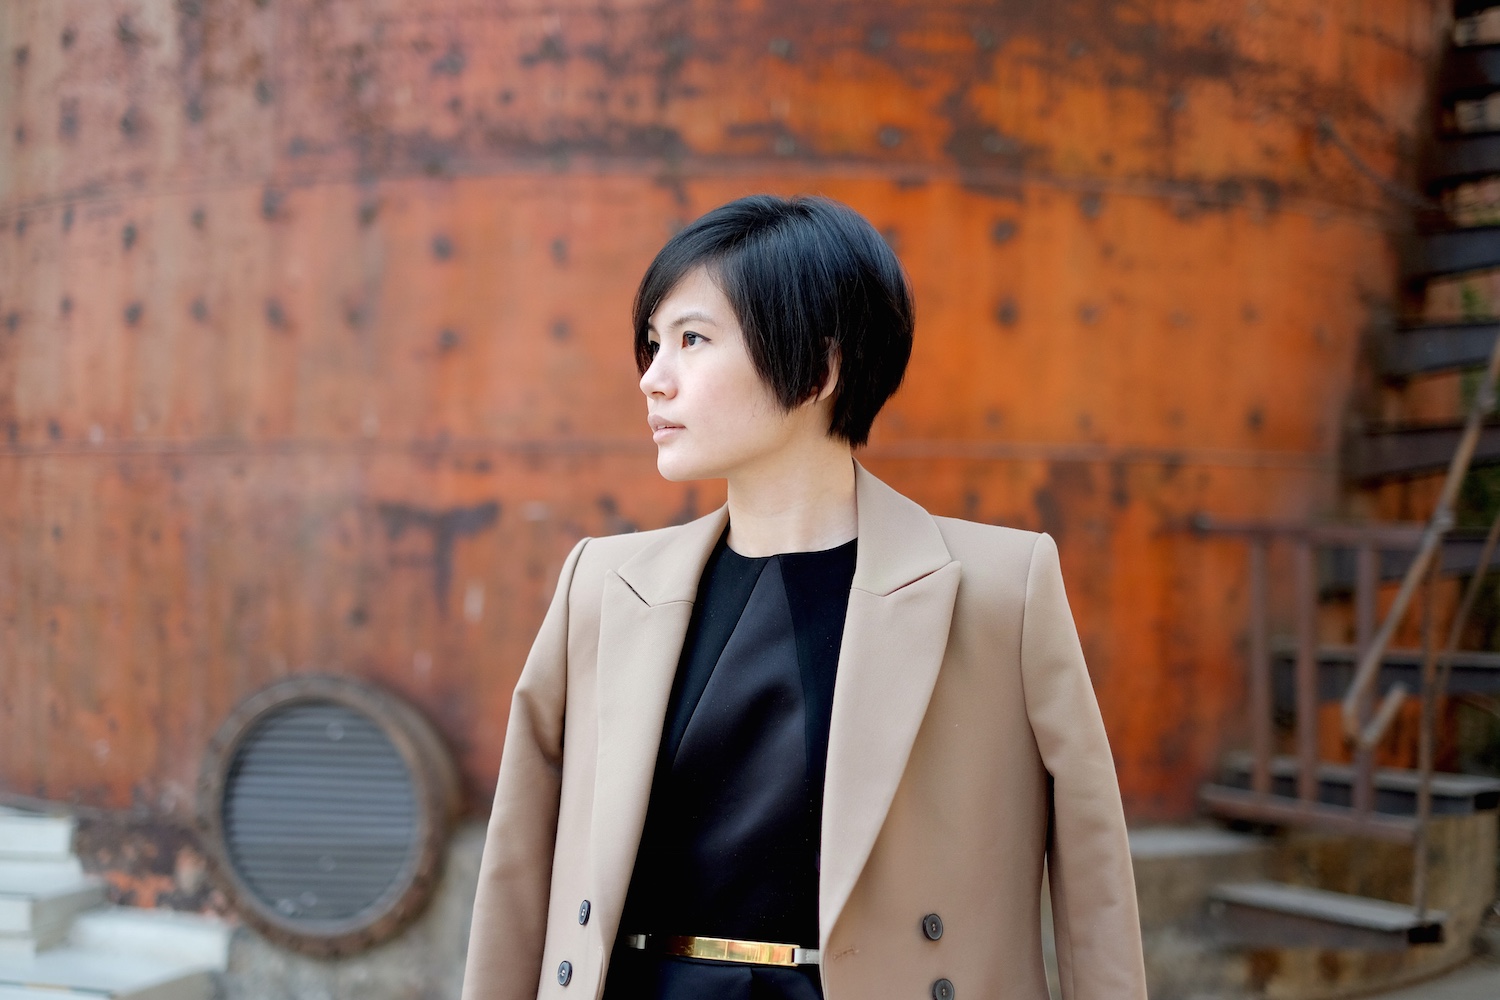 A short haired woman with sepia colored suit and black blouse is posing in front of factory building